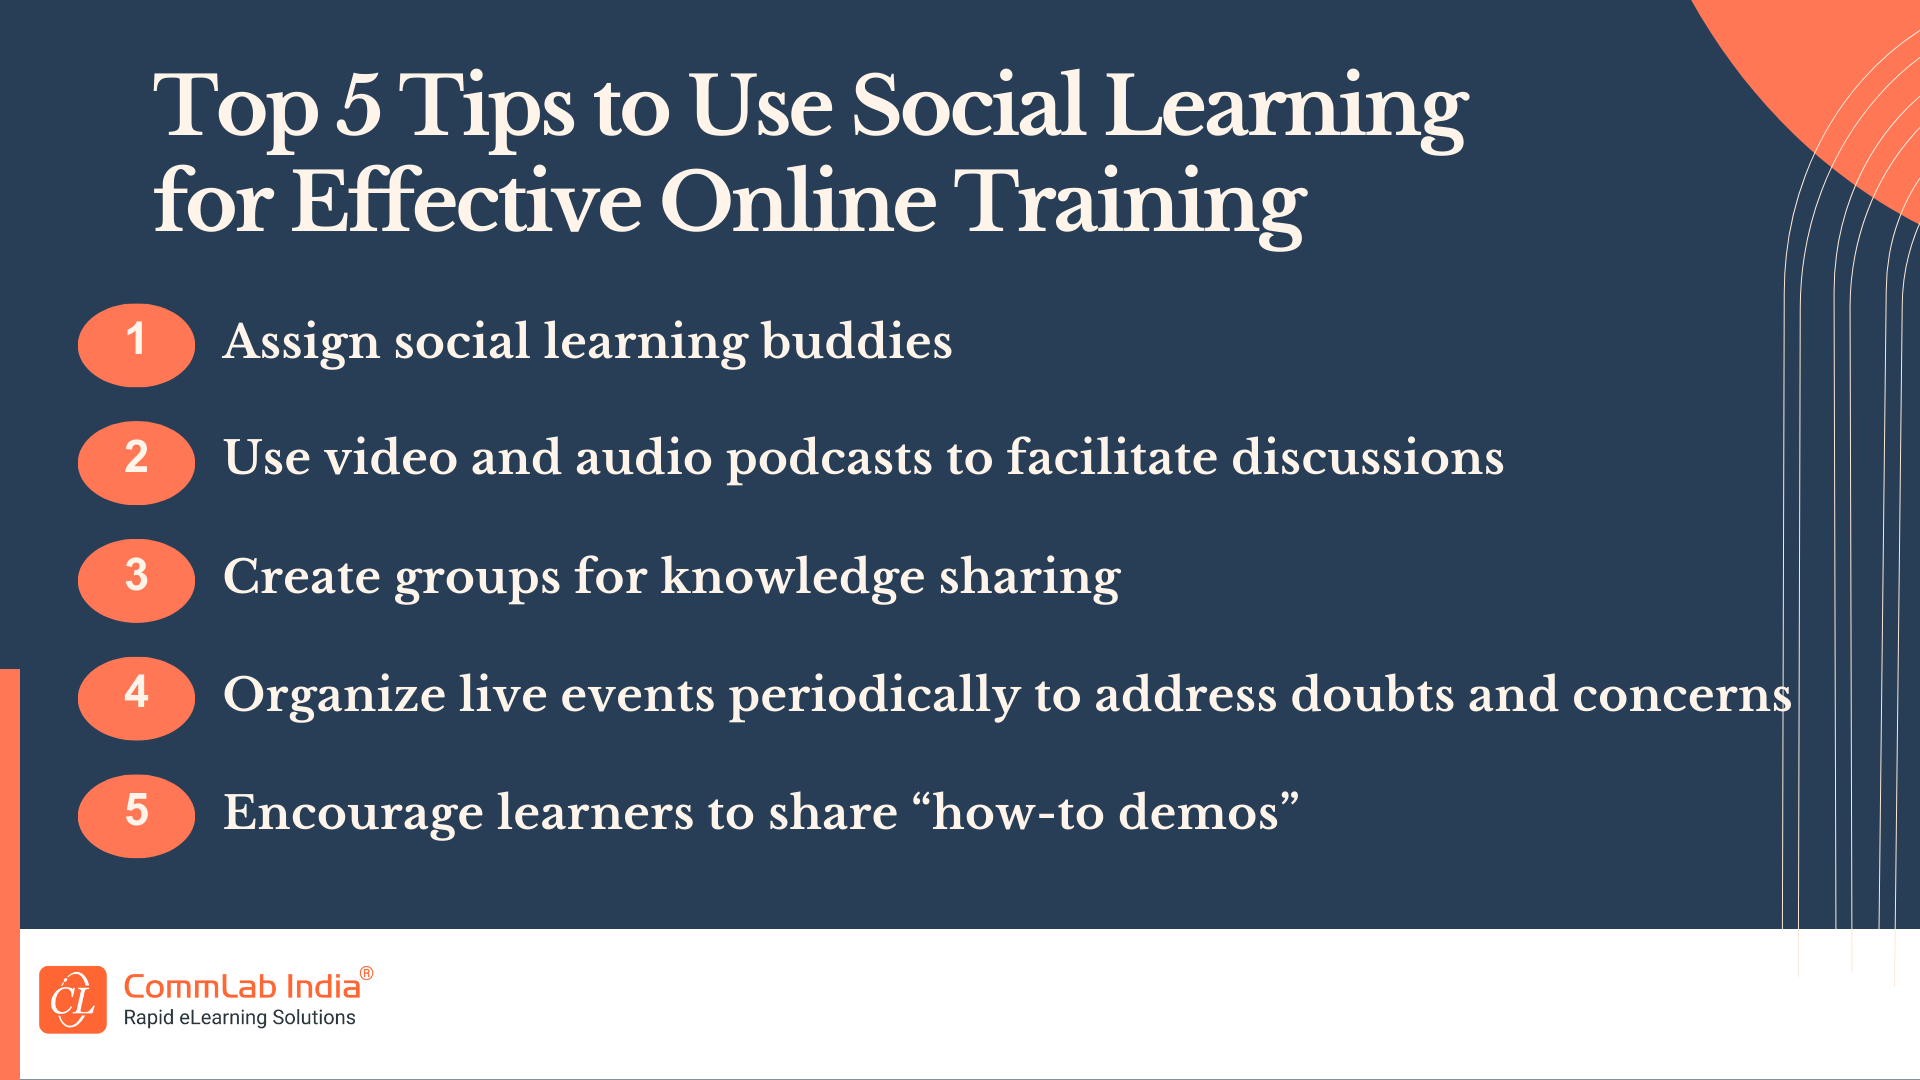 Top 5 Tips to Use Social Learning for Effective Online Training-1